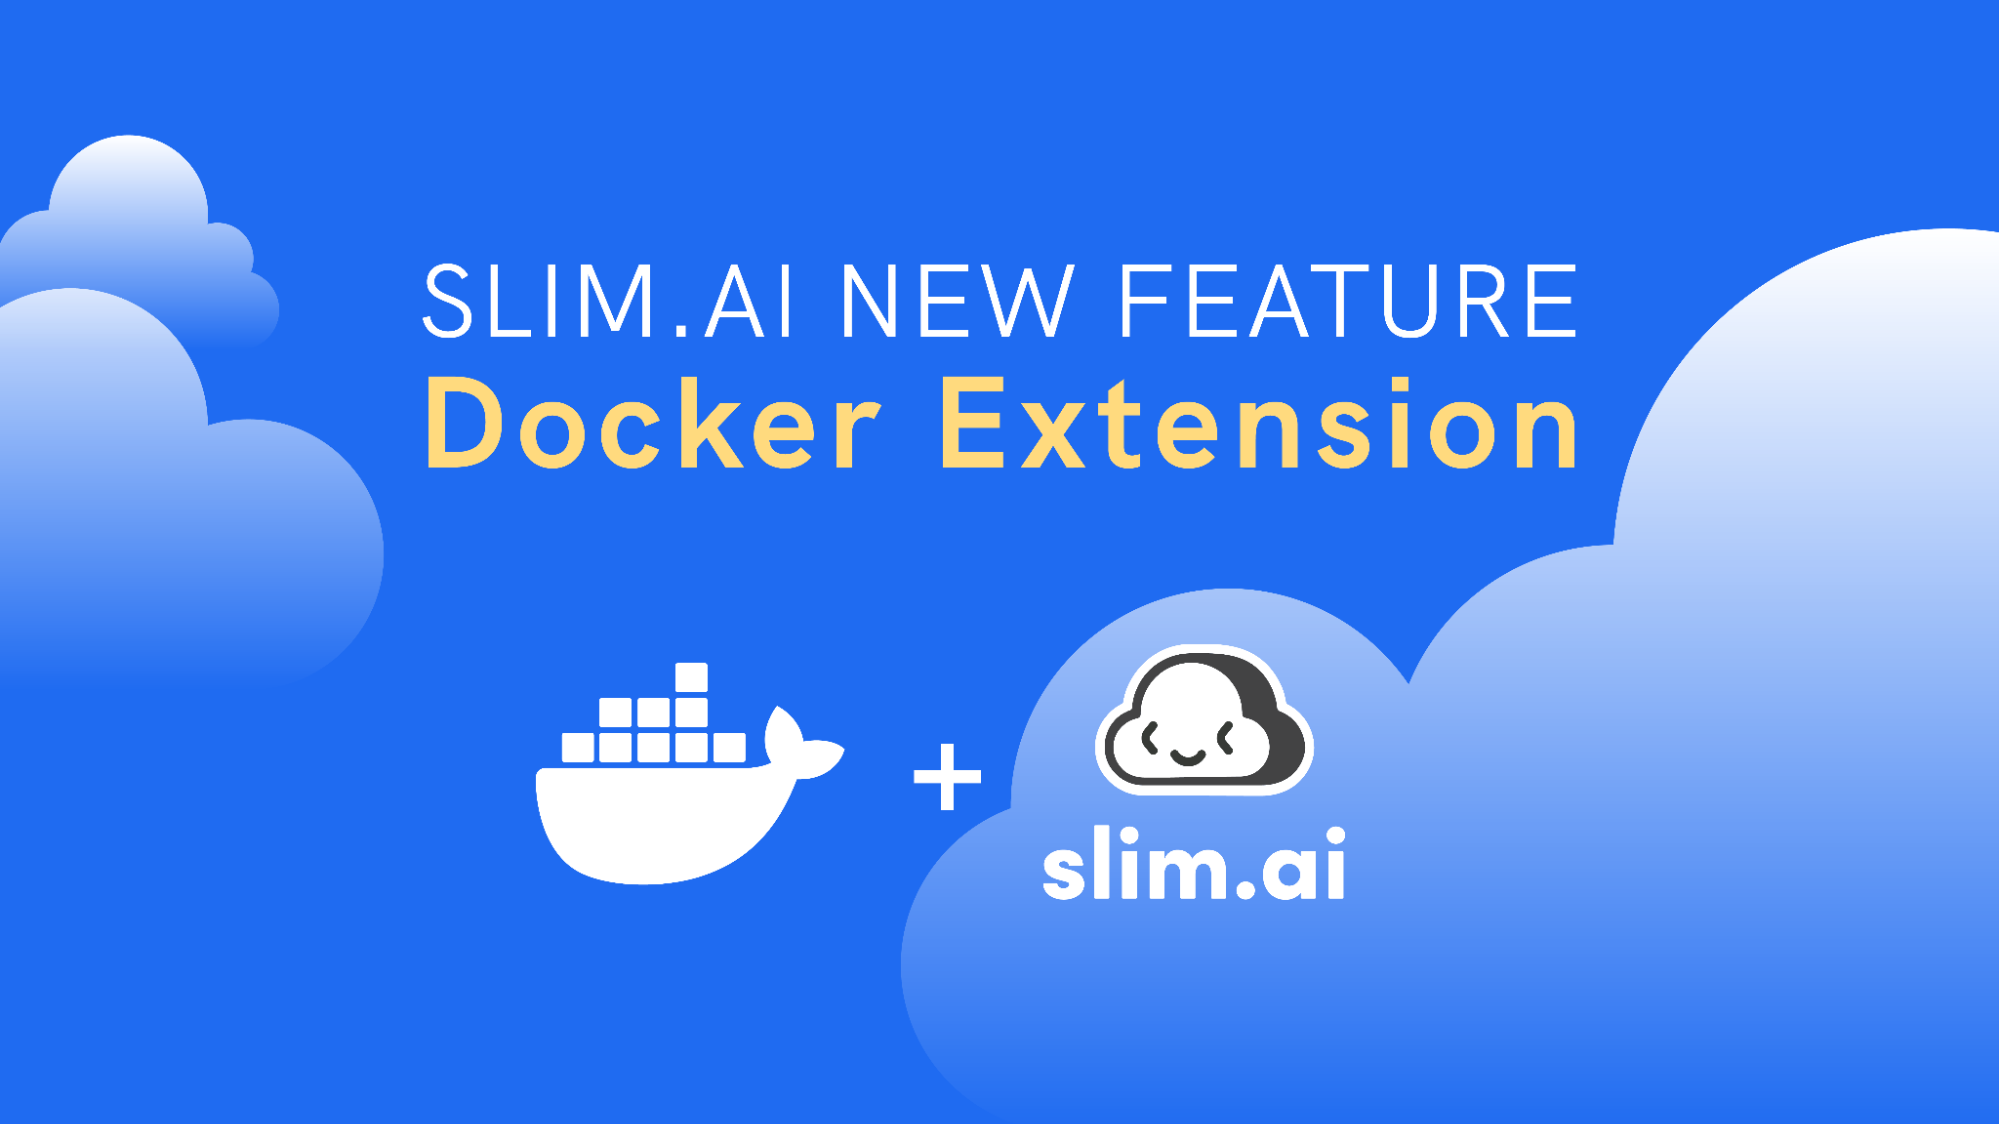 This image showcases the two logos for docker and slim. Ai with the title "slim. Ai new feature docker extensions" above them.